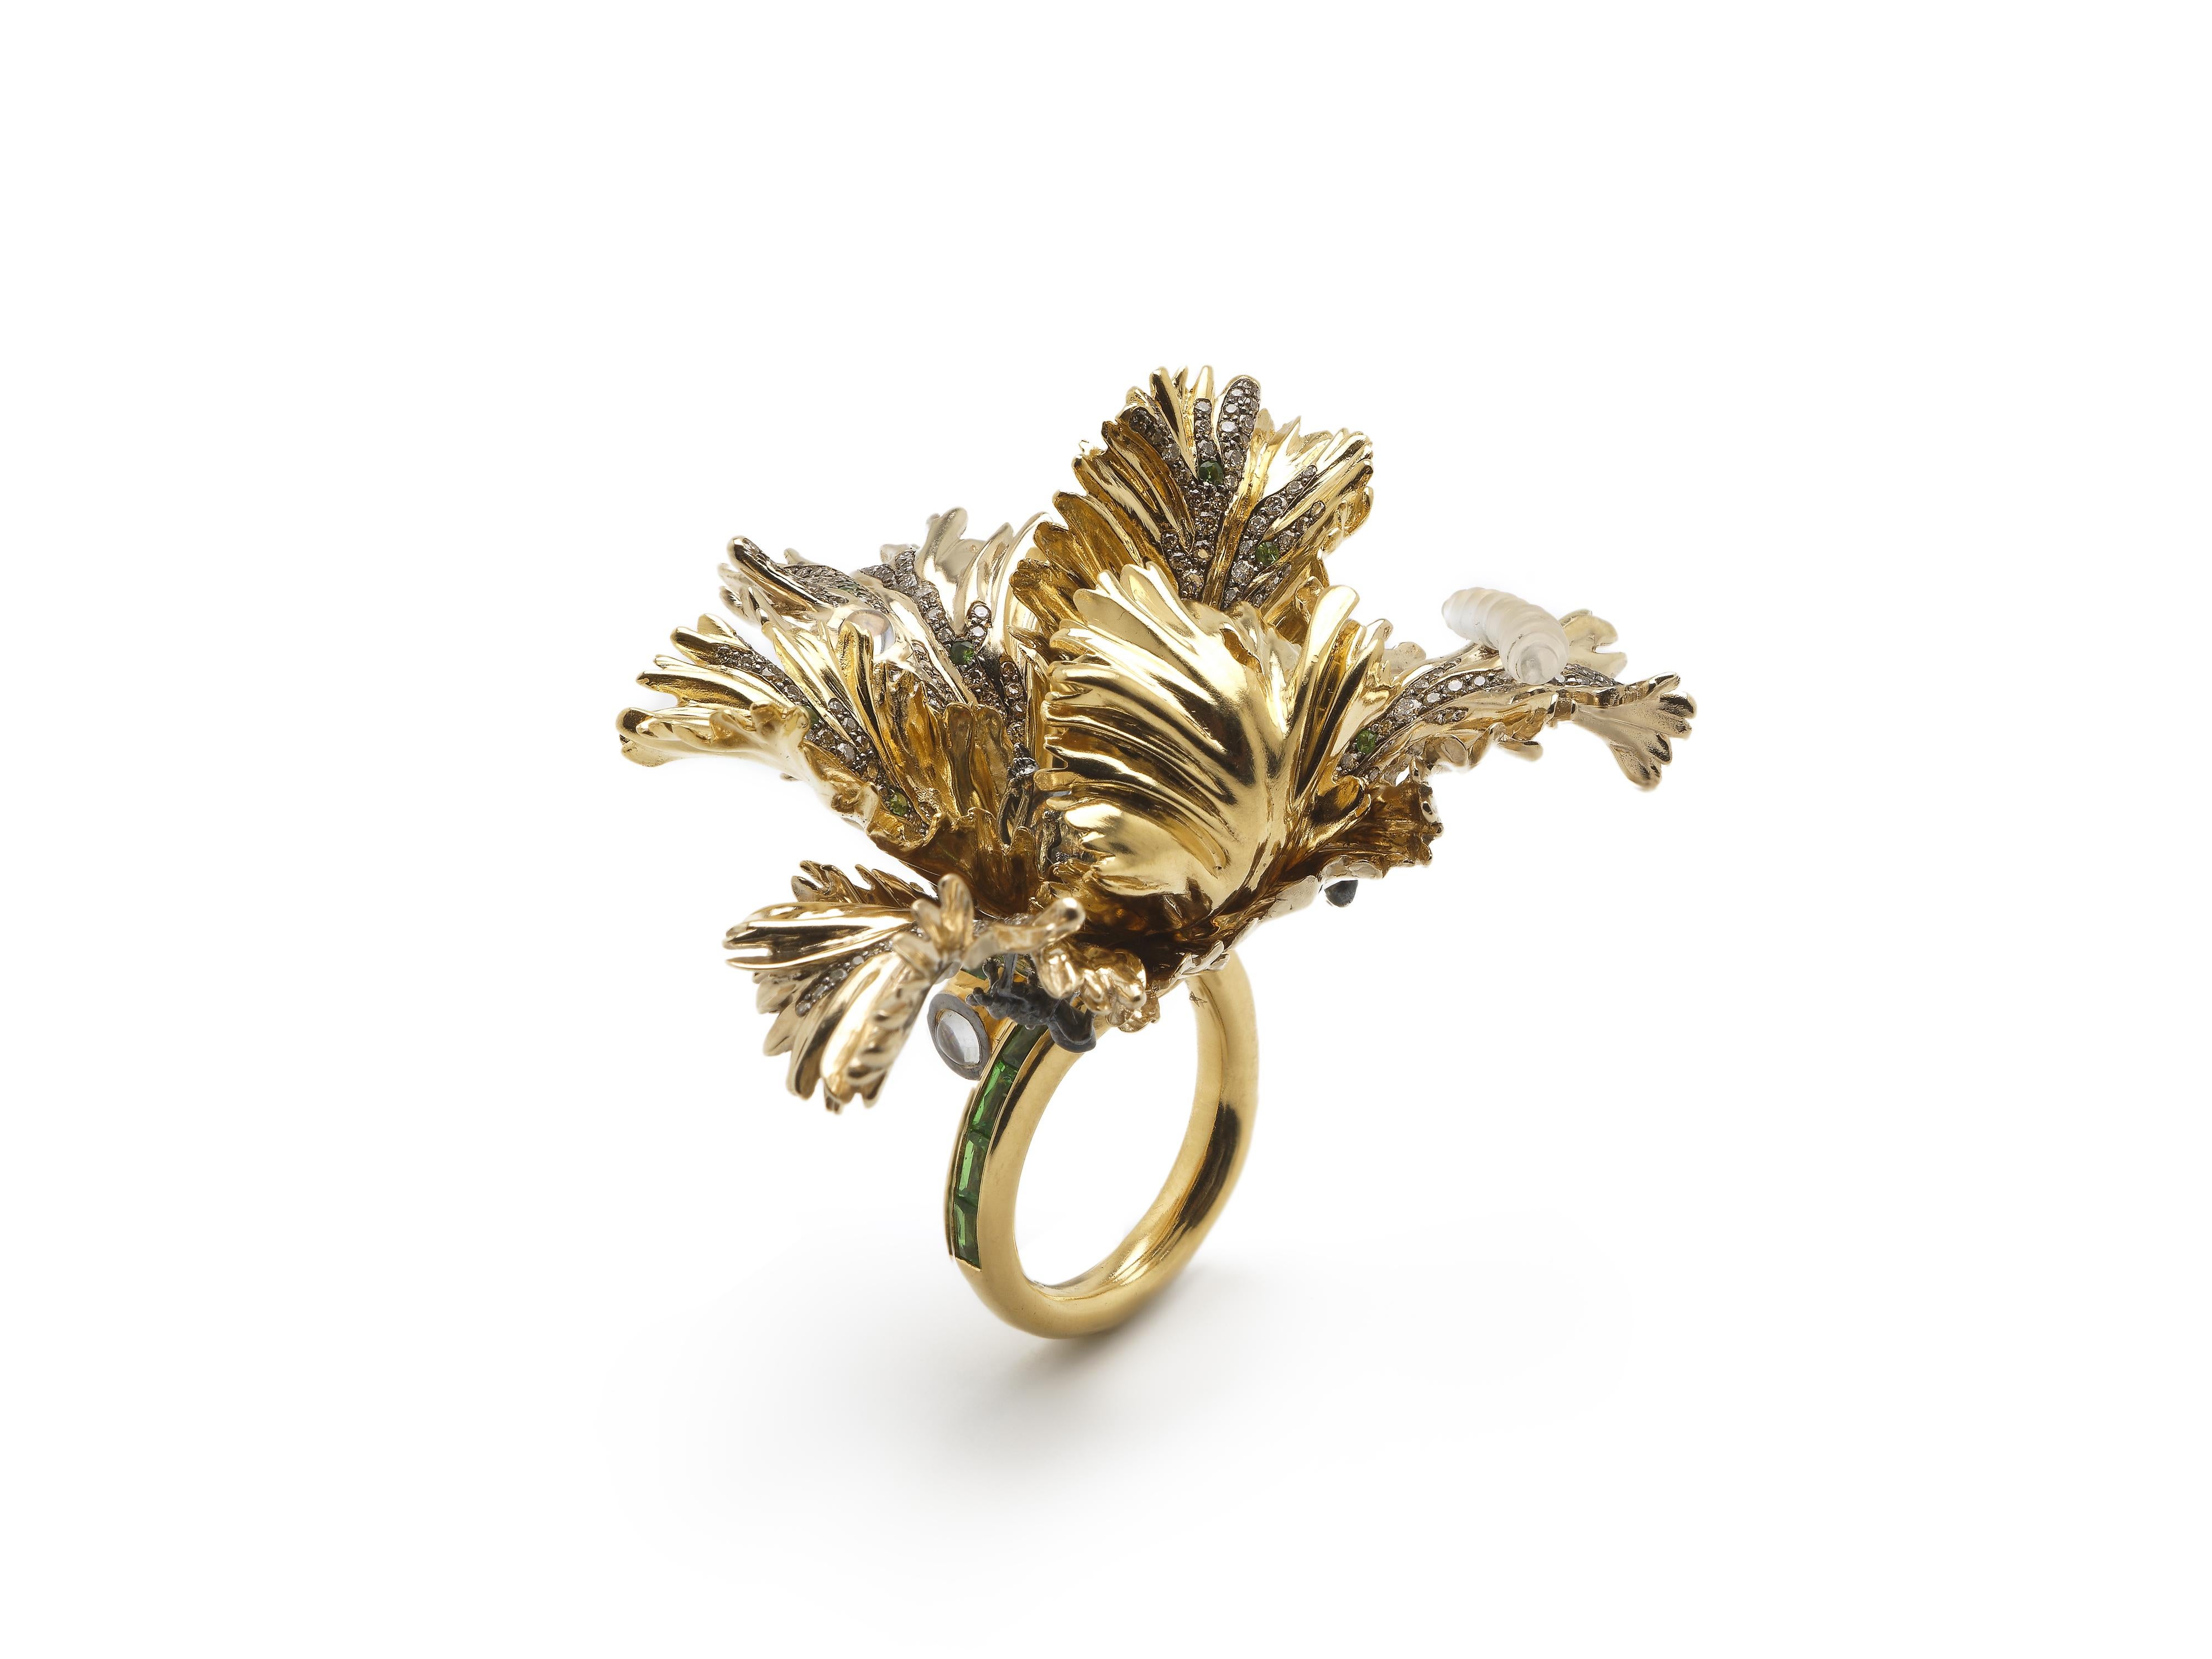 Inspired by the flamboyant beauty of the Parrot Tulip, the Big Tulip Ring blooms over the hand, for a unique take on a cocktail ring. 

The ring’s petals are designed in 18k white and yellow gold with blackened gold detailing, and embellished with